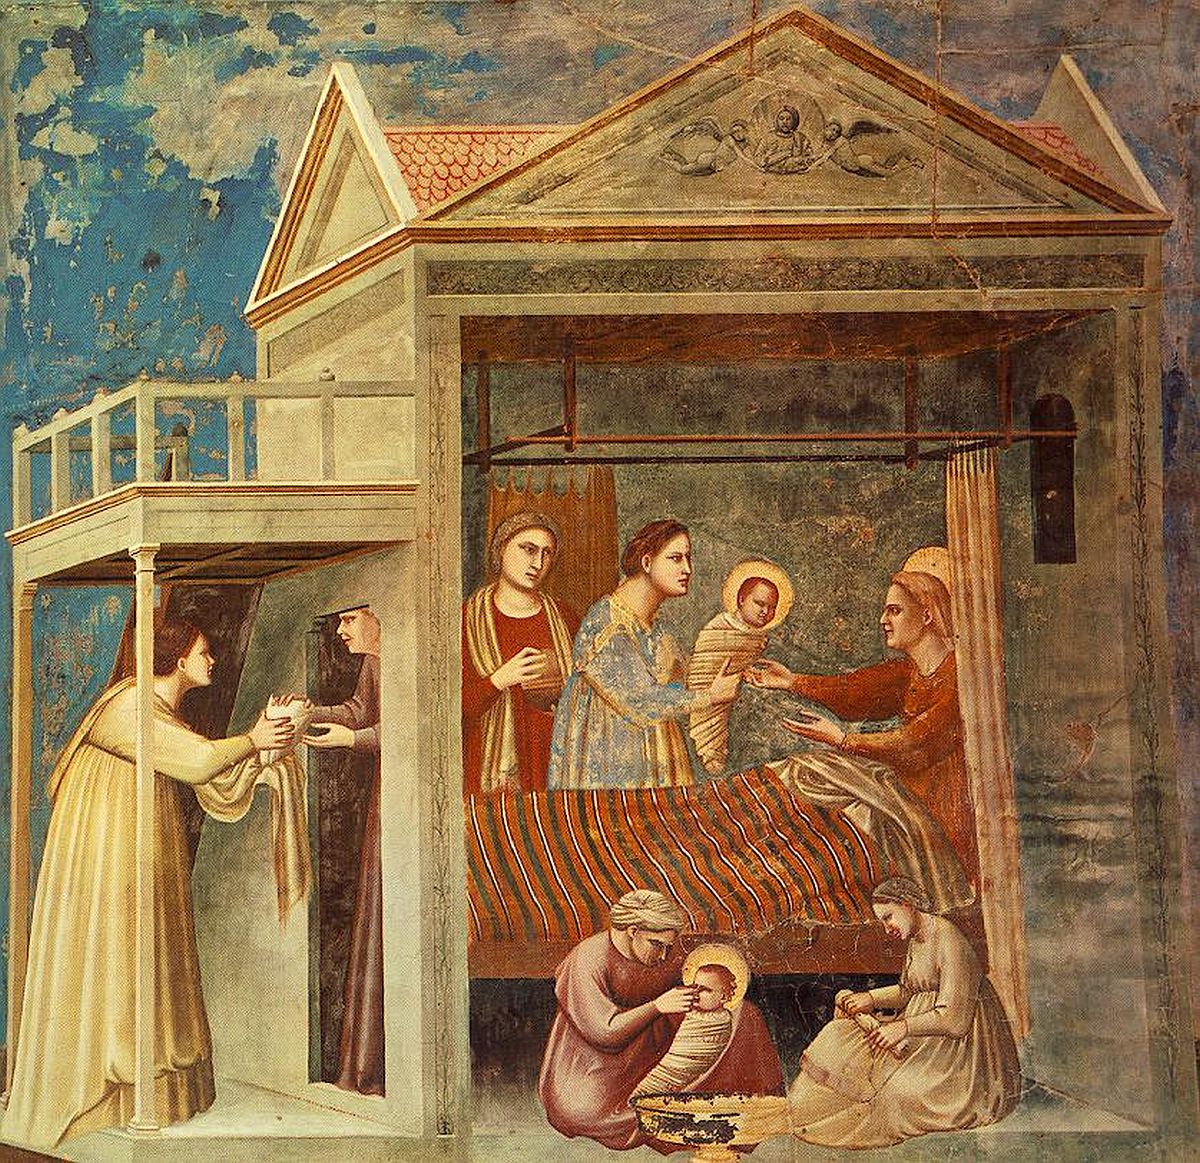 Giotto "The Birth of Mary" (1303).